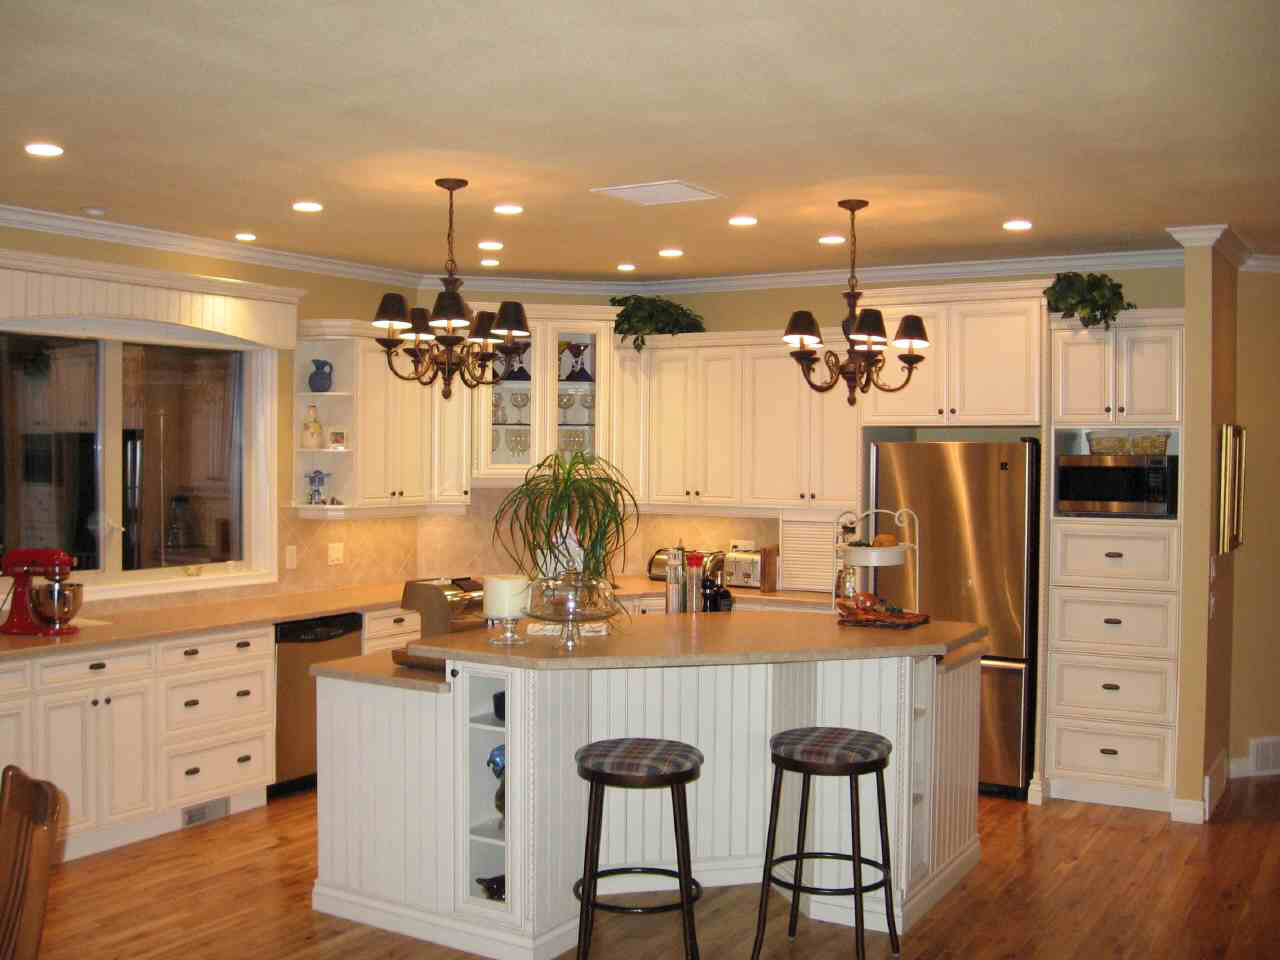 Contemporary Kitchen Pictures